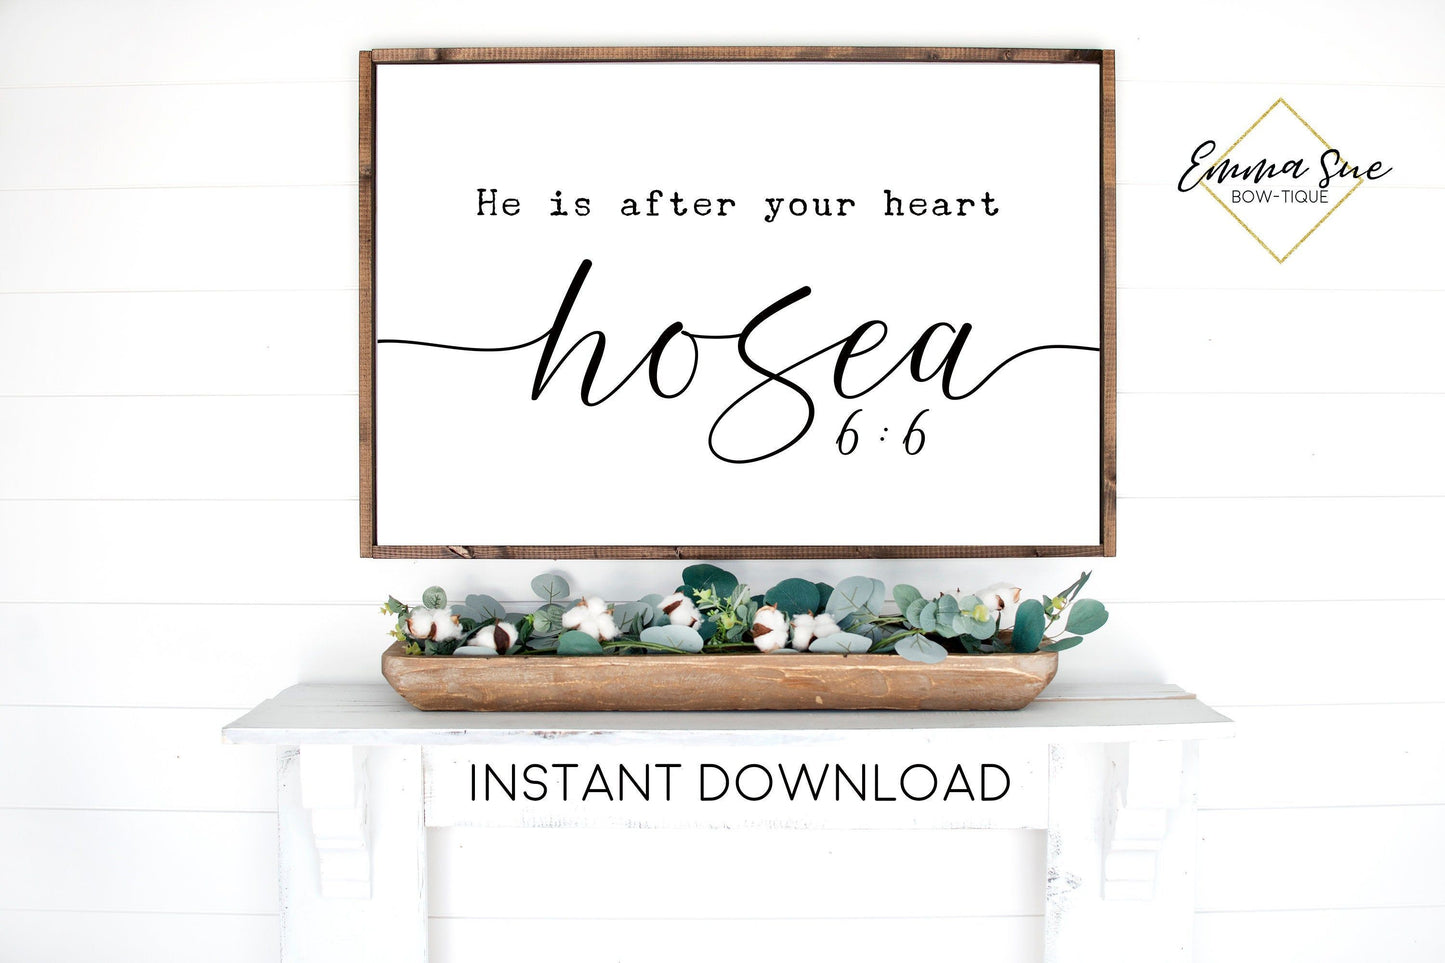 He is after your heart Hosea 6:6 God's Love Bible Verse Farmhouse Printable Sign